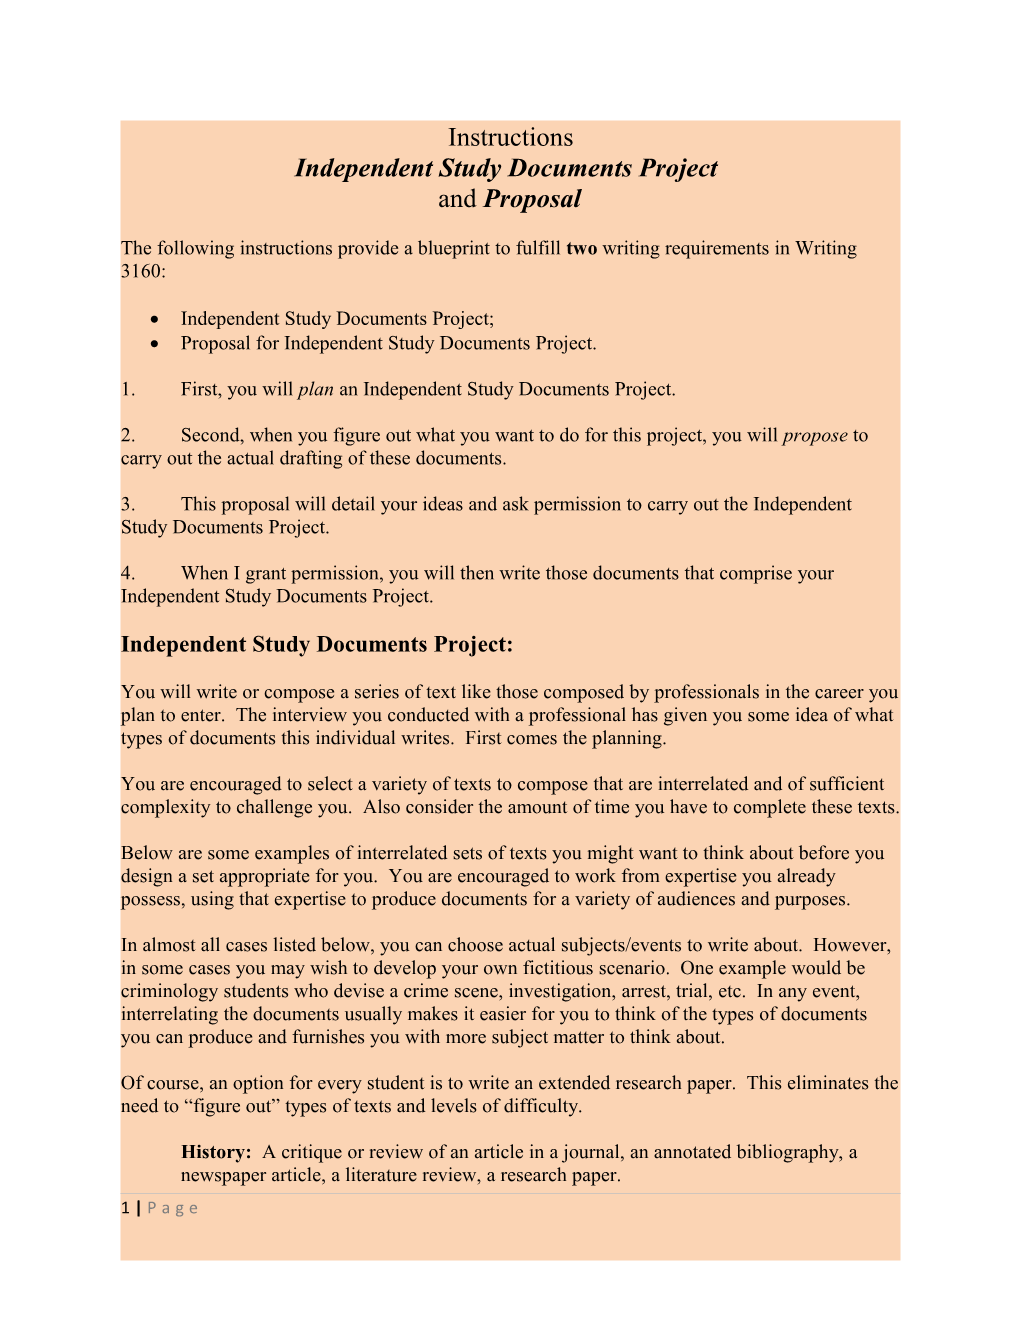 Independent Study Documents Project